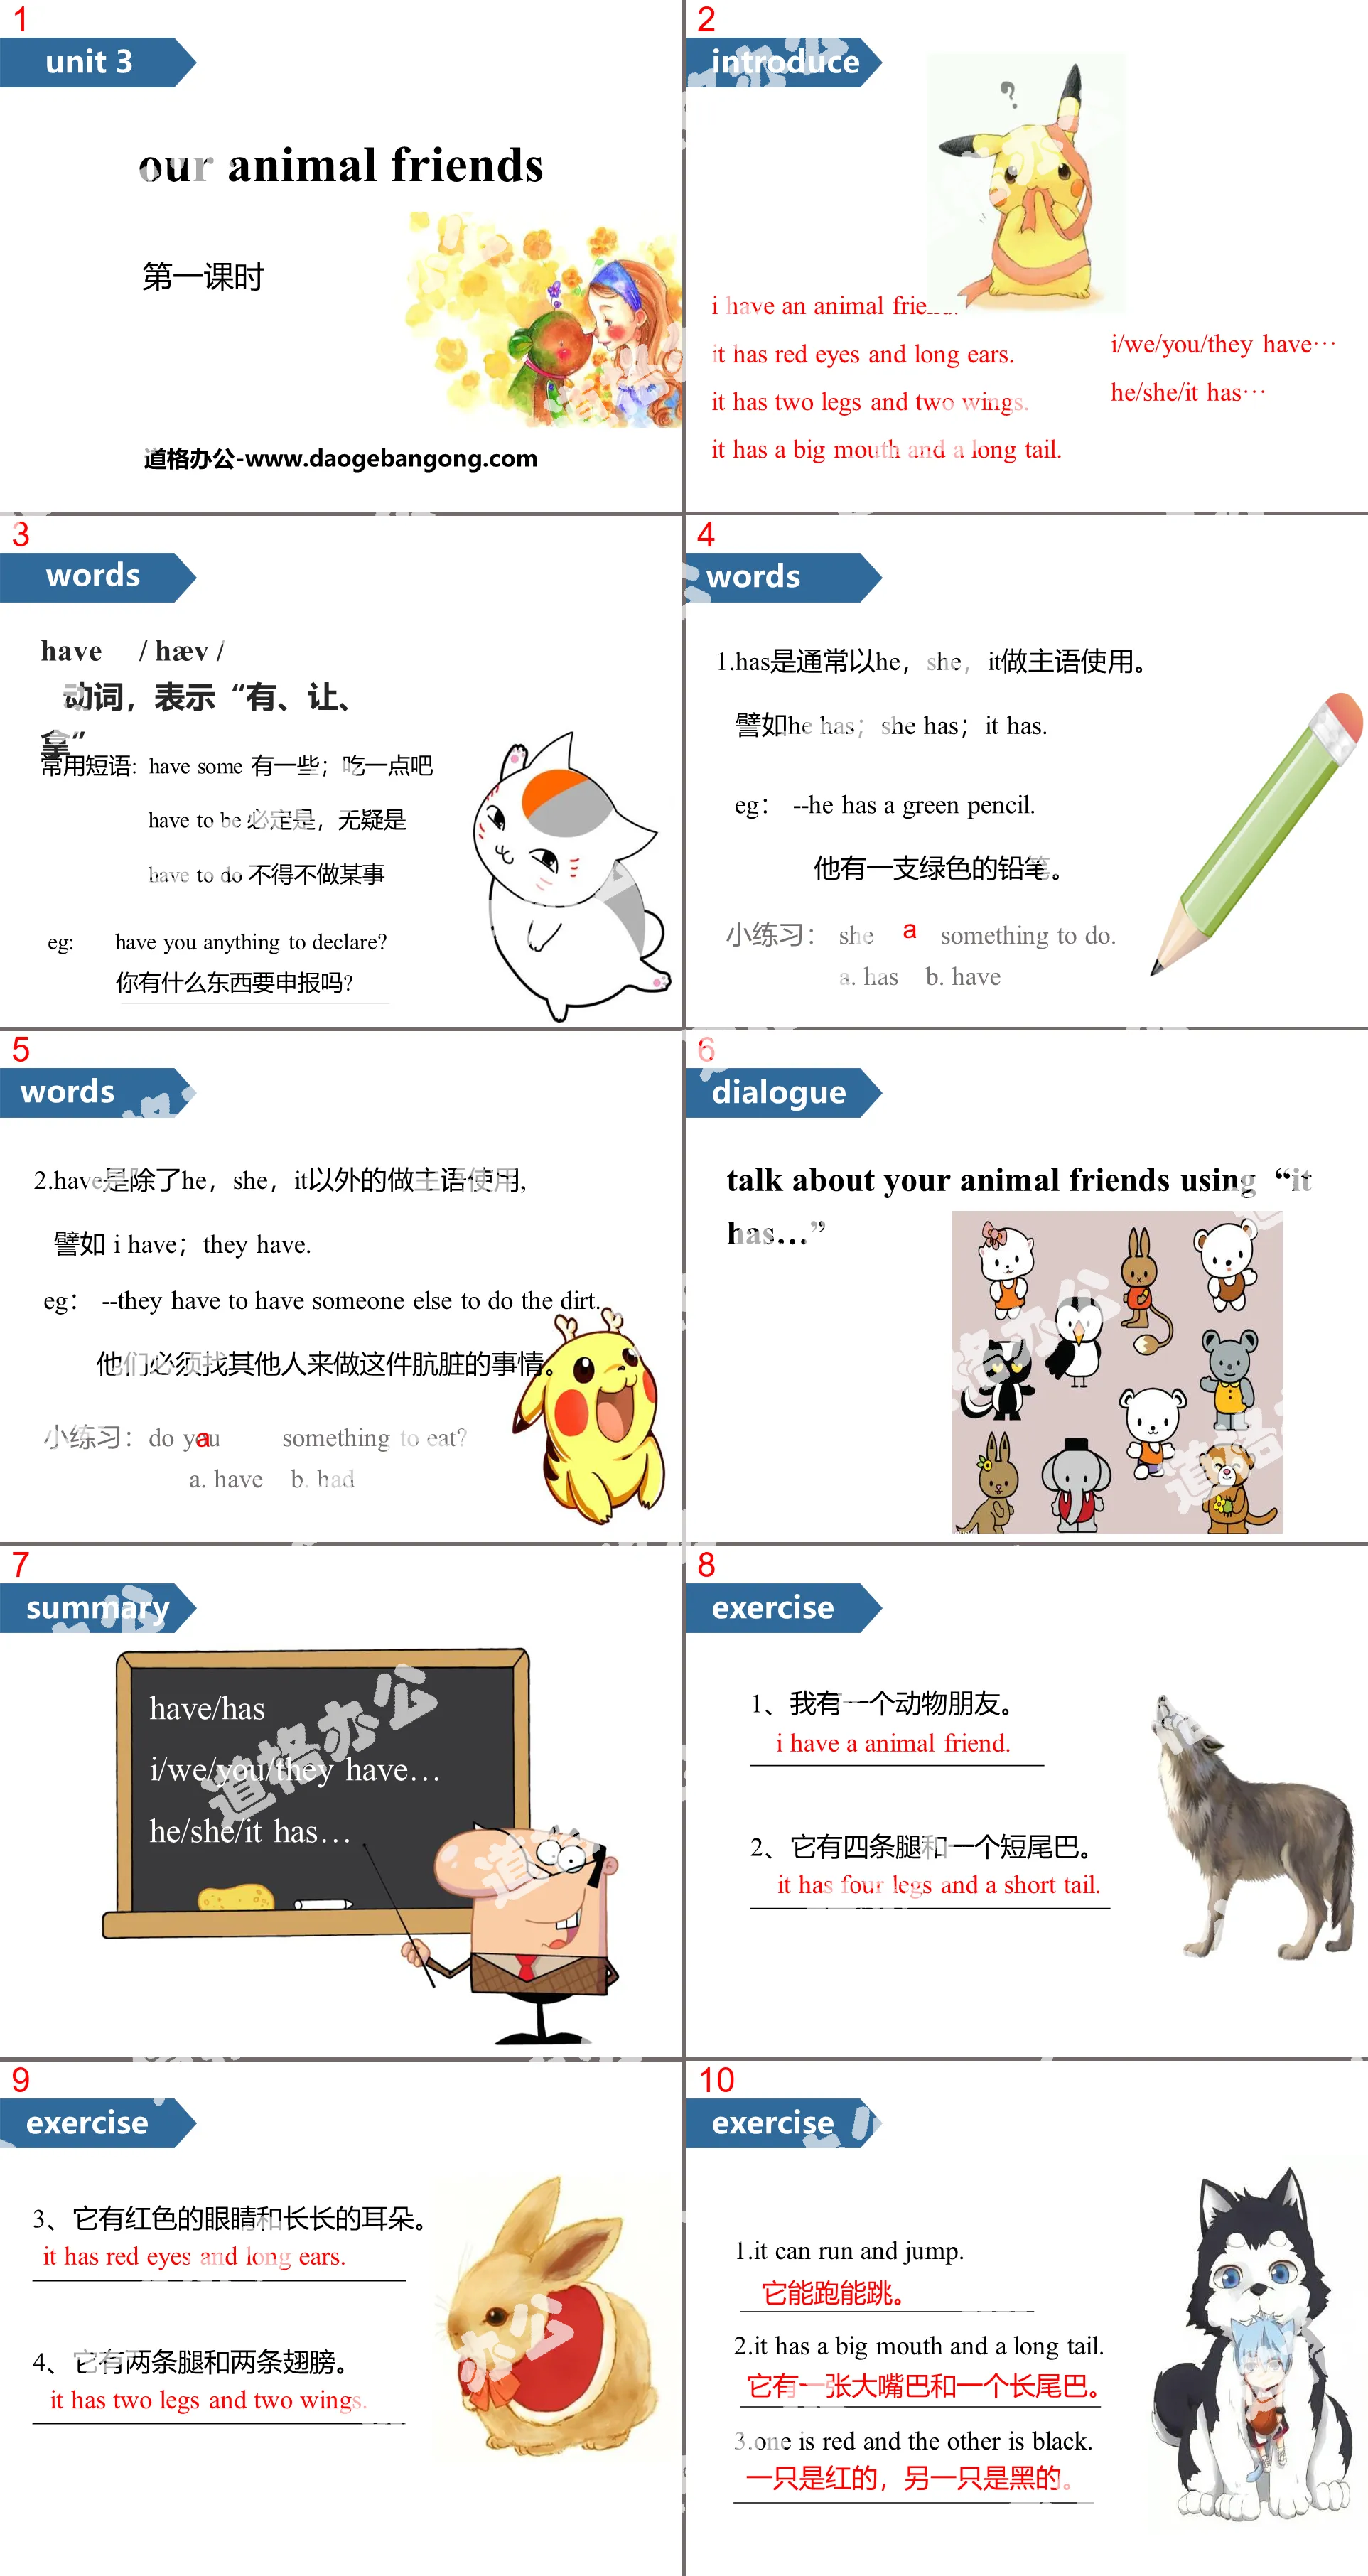 《Our animal friends》PPT(第一课时)
